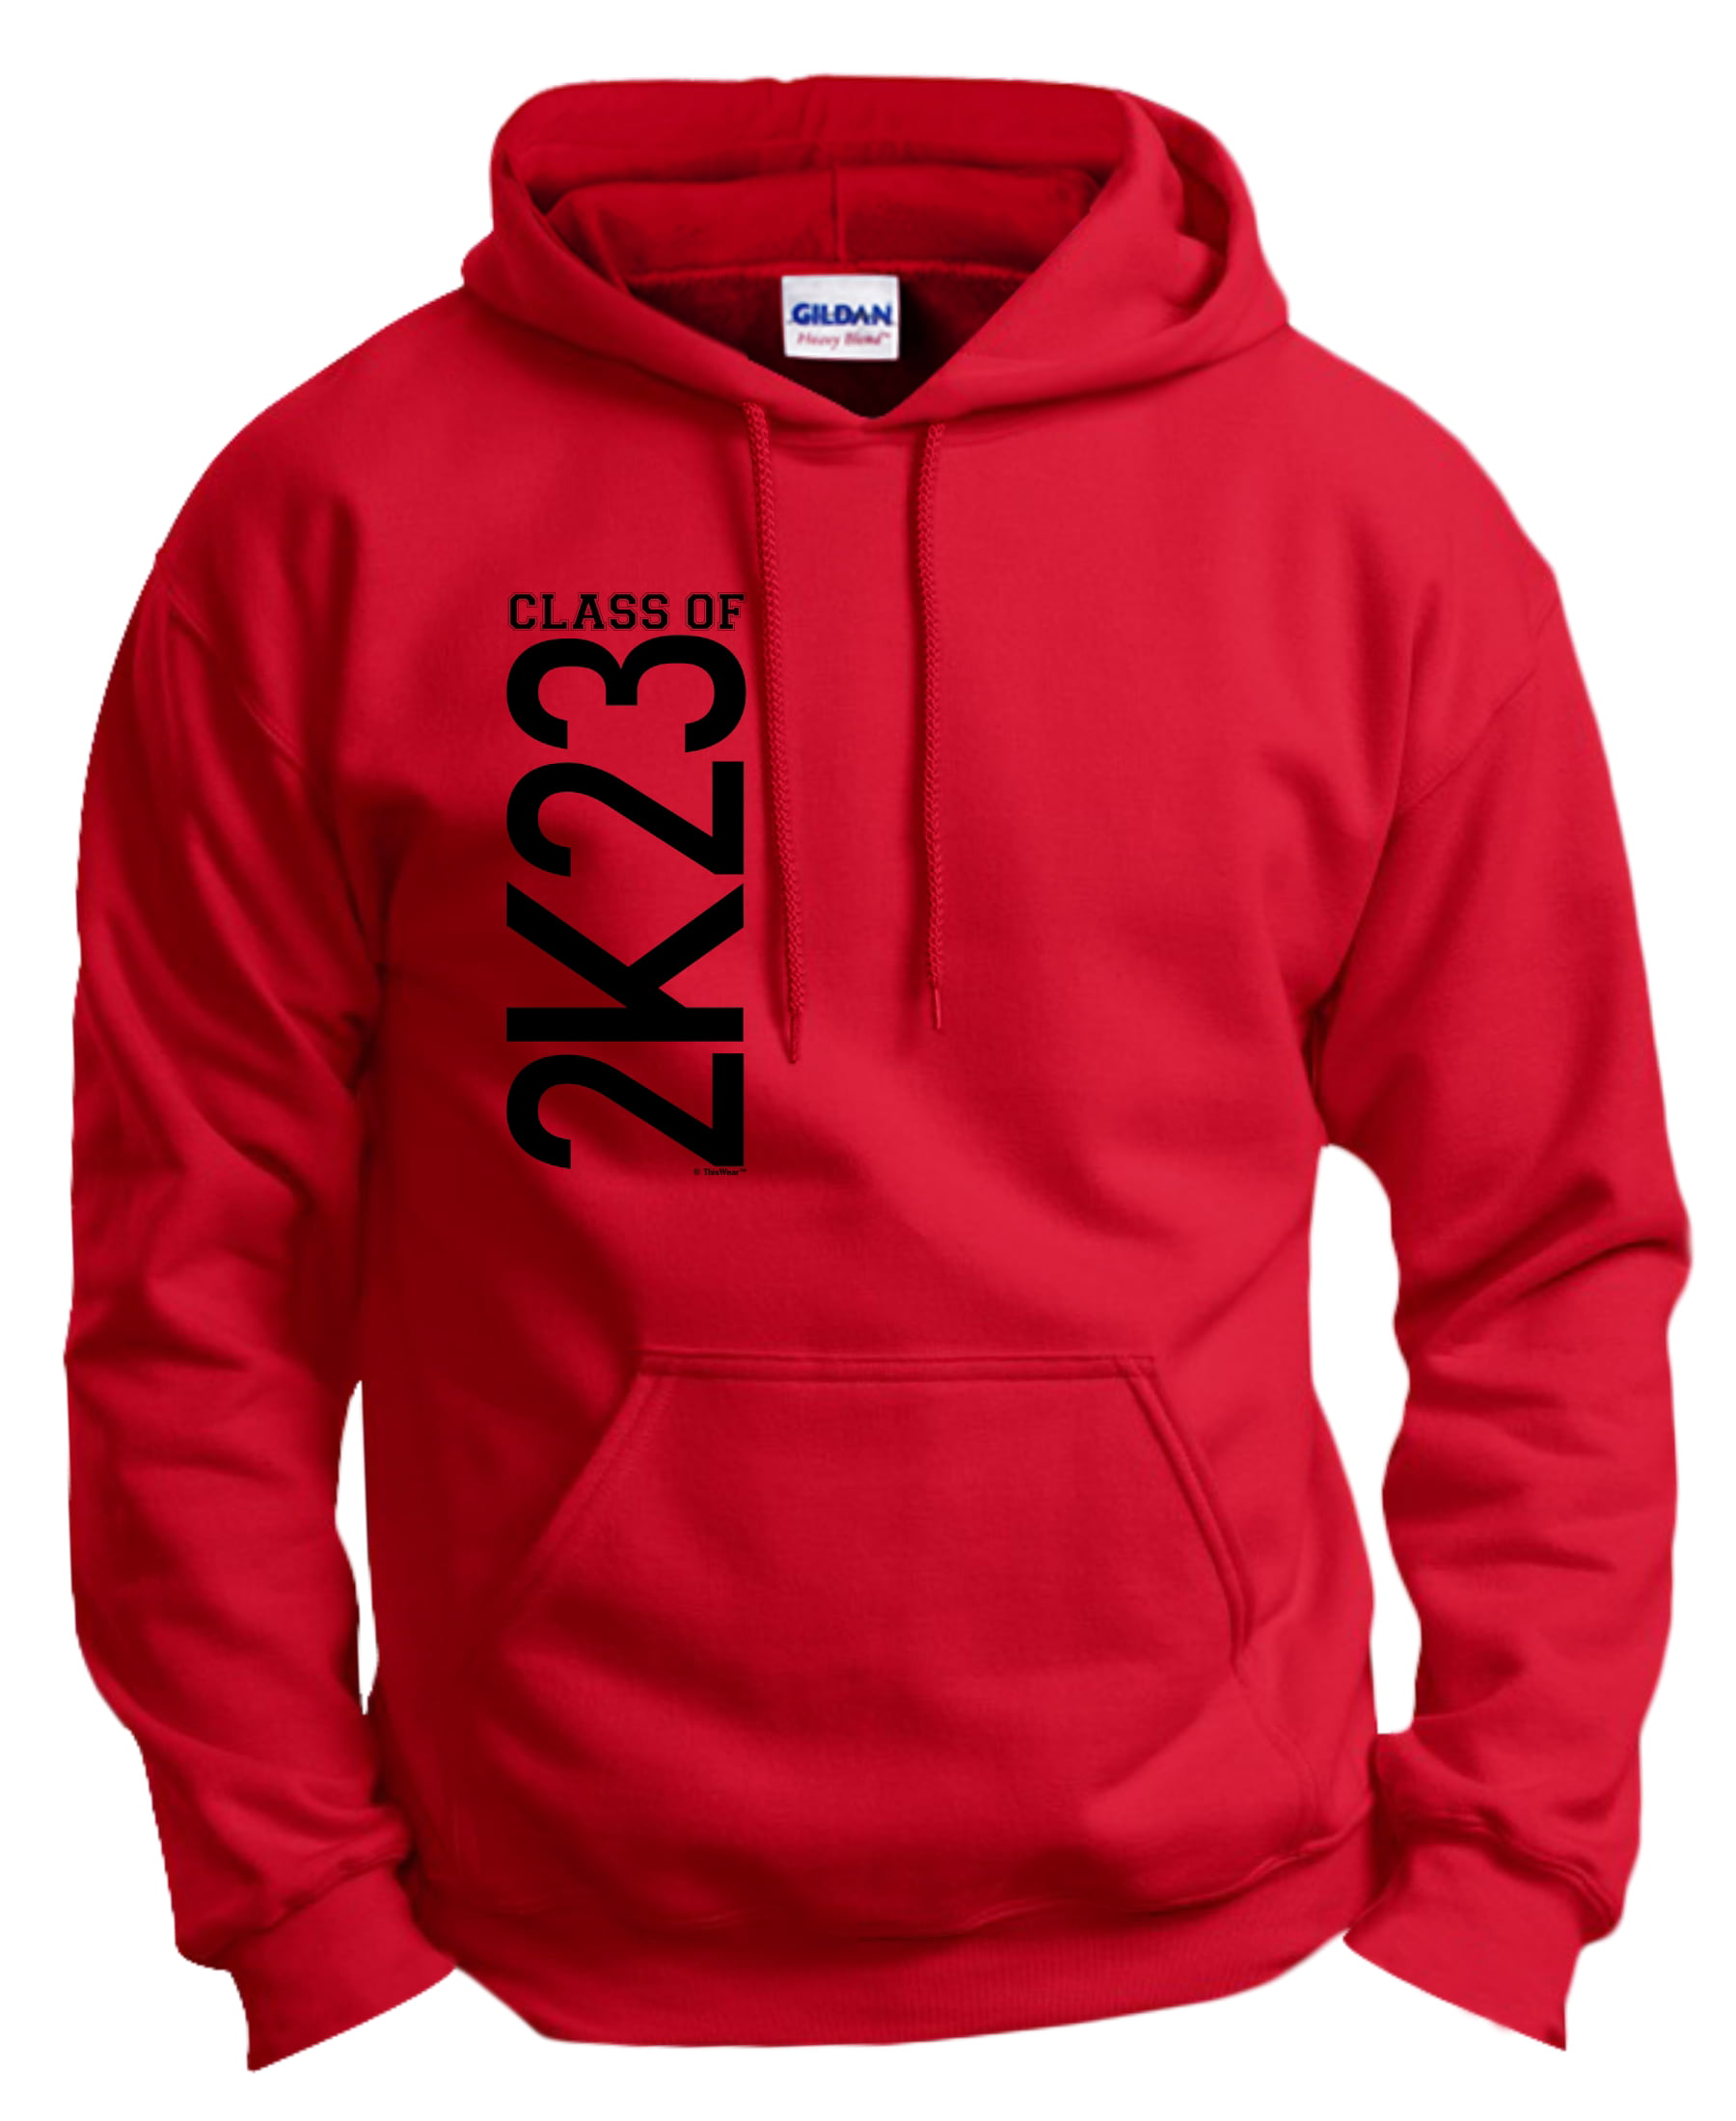 ThisWear Graduate Gifts Class of 2023 2K23 Graduation Hoodie